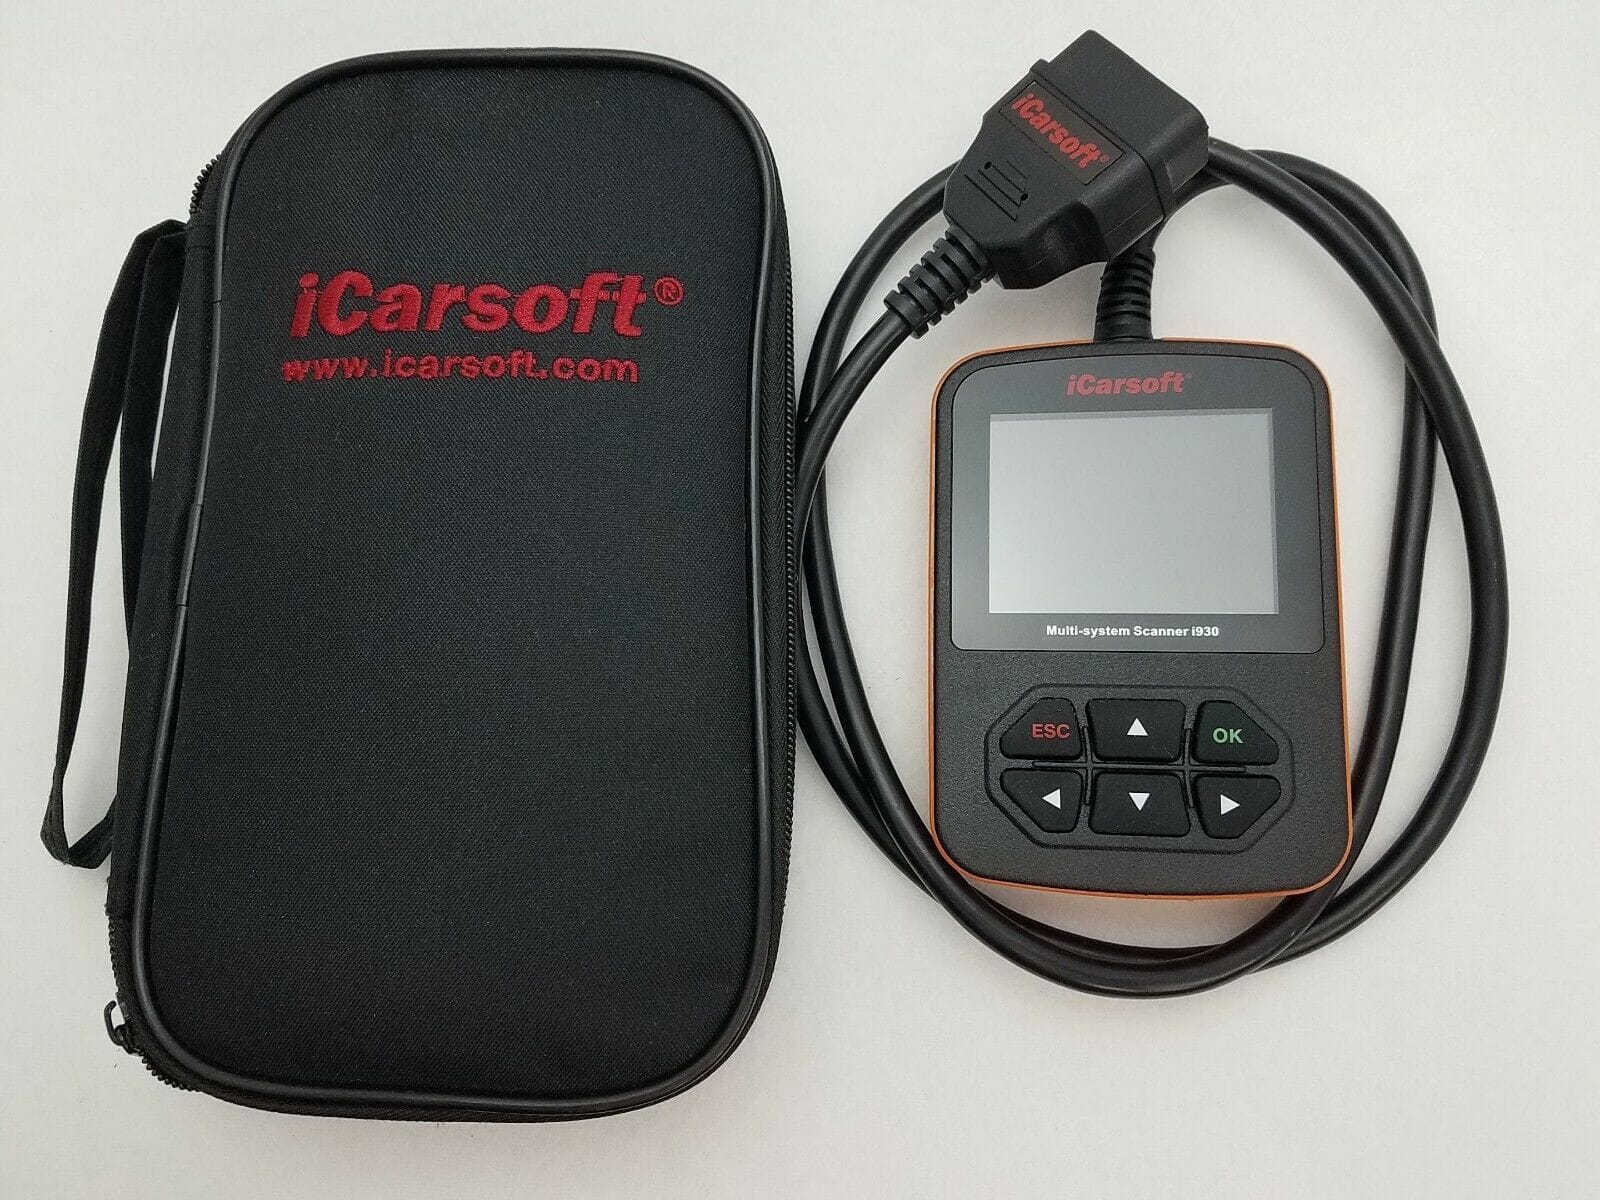 Miscellaneous - iCarsoft Diagnostic Tool i930 compatible with Land Rover/Jaguar Vehicle OBDII - Used - 2013 to 2017 Jaguar F-Type - Chesapeake, VA 23320, United States